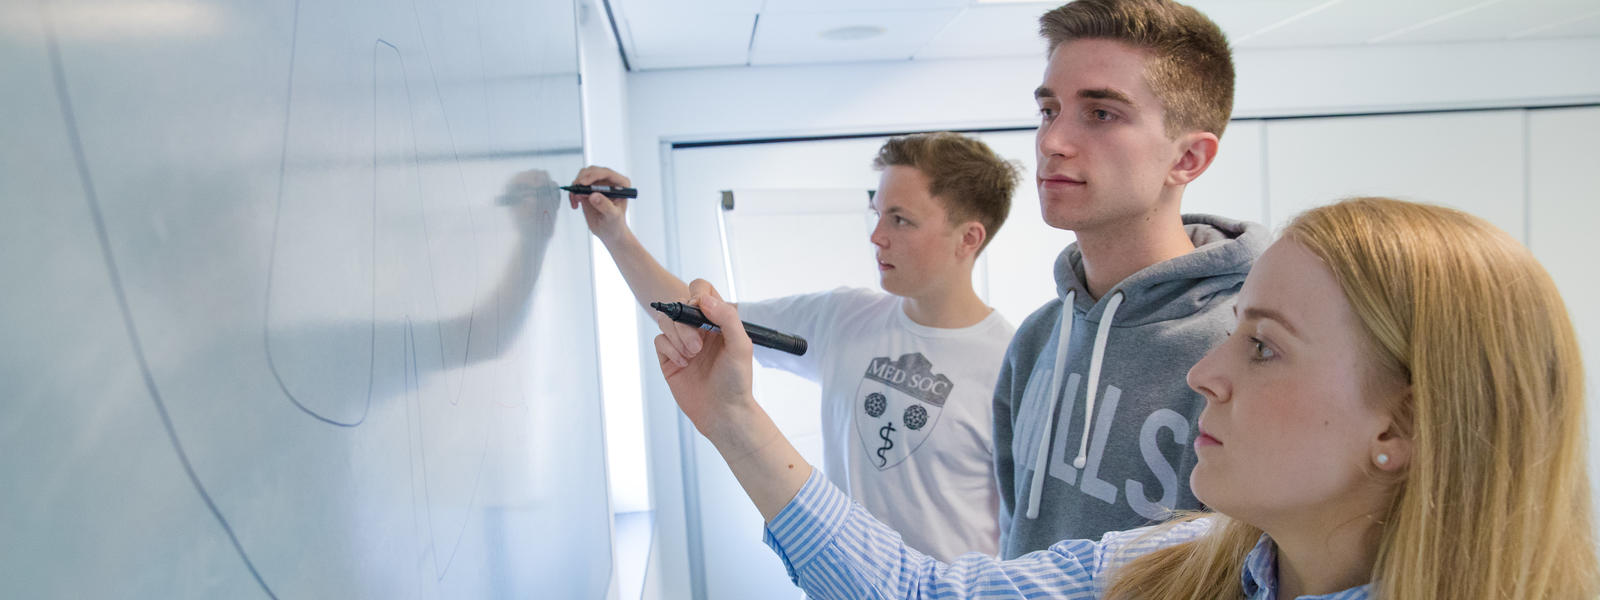 Three students work on a whiteboard